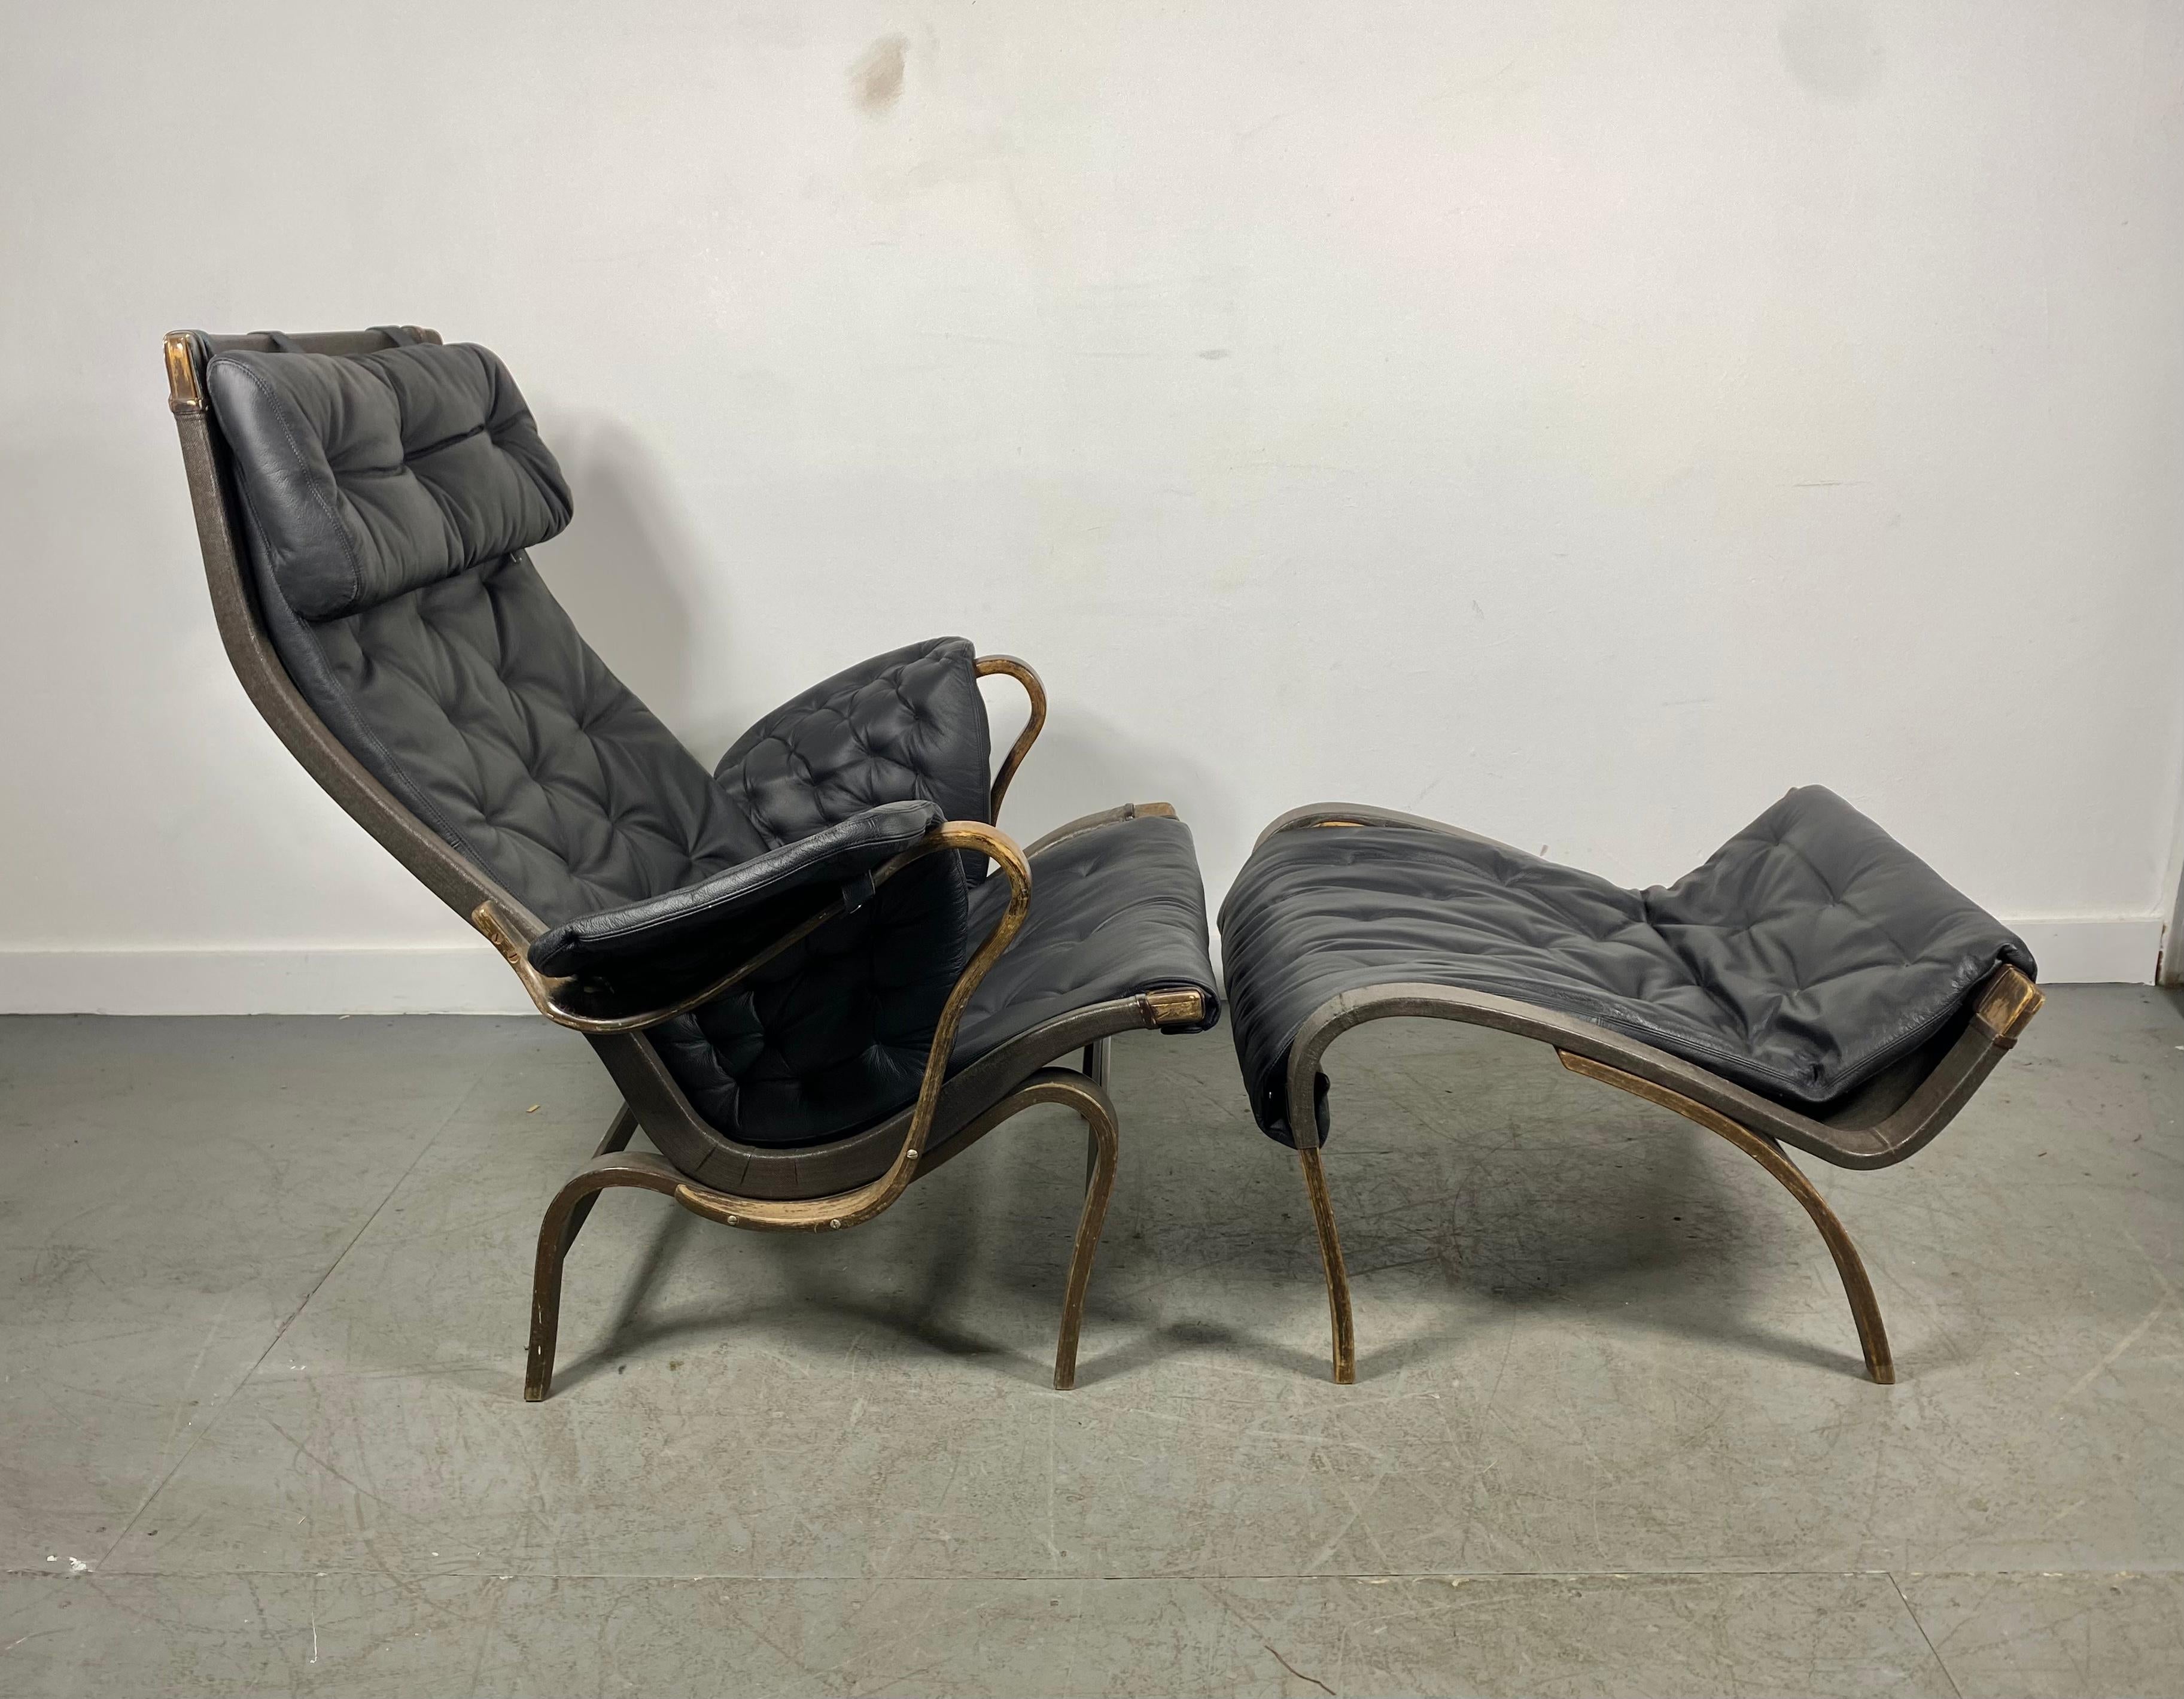 A Pernilla leather lounge chair and ottoman Designed by Bruno Mathsson and made by Dux. 1960s.

Leather and canvas on a bentwood beech frame, organic in form.Recently professionally reupholstered in high quality leather..Distressed frame..